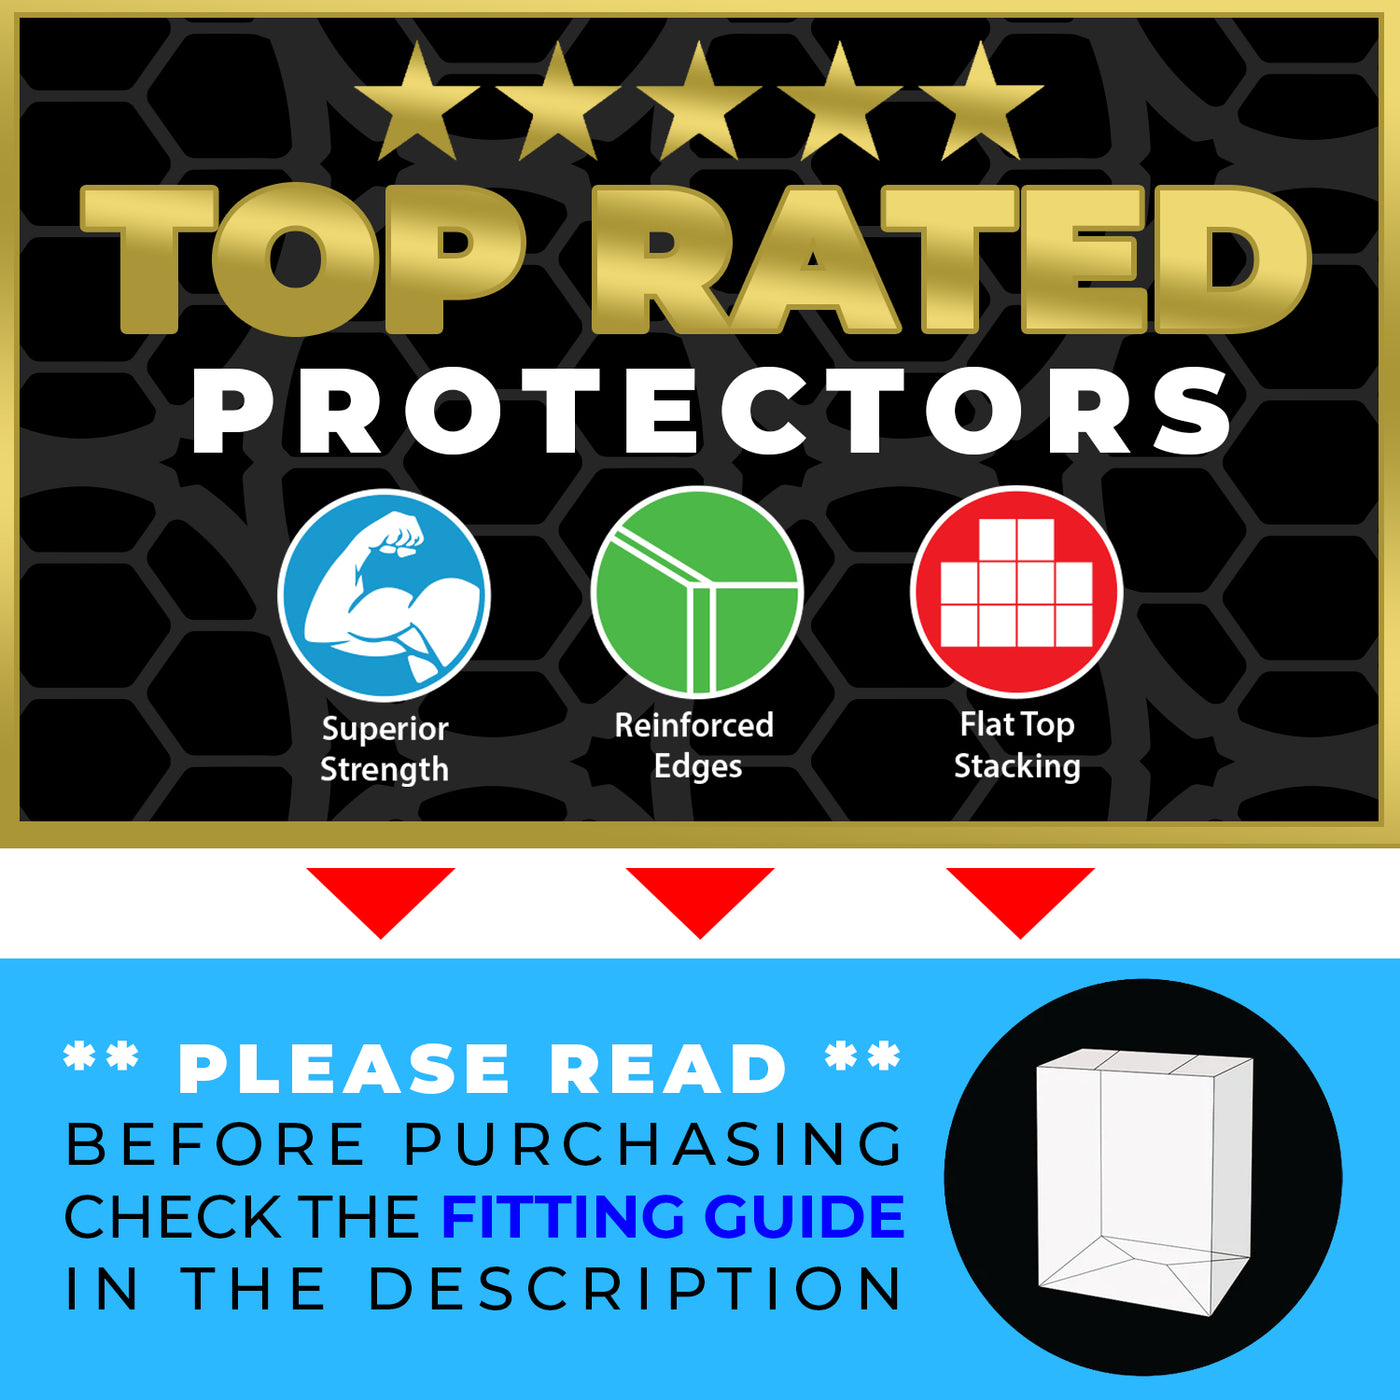 pop albums best funko pop protectors thick strong uv scratch flat top stack vinyl display geek plastic shield vaulted eco armor fits collect protect display case kollector protector